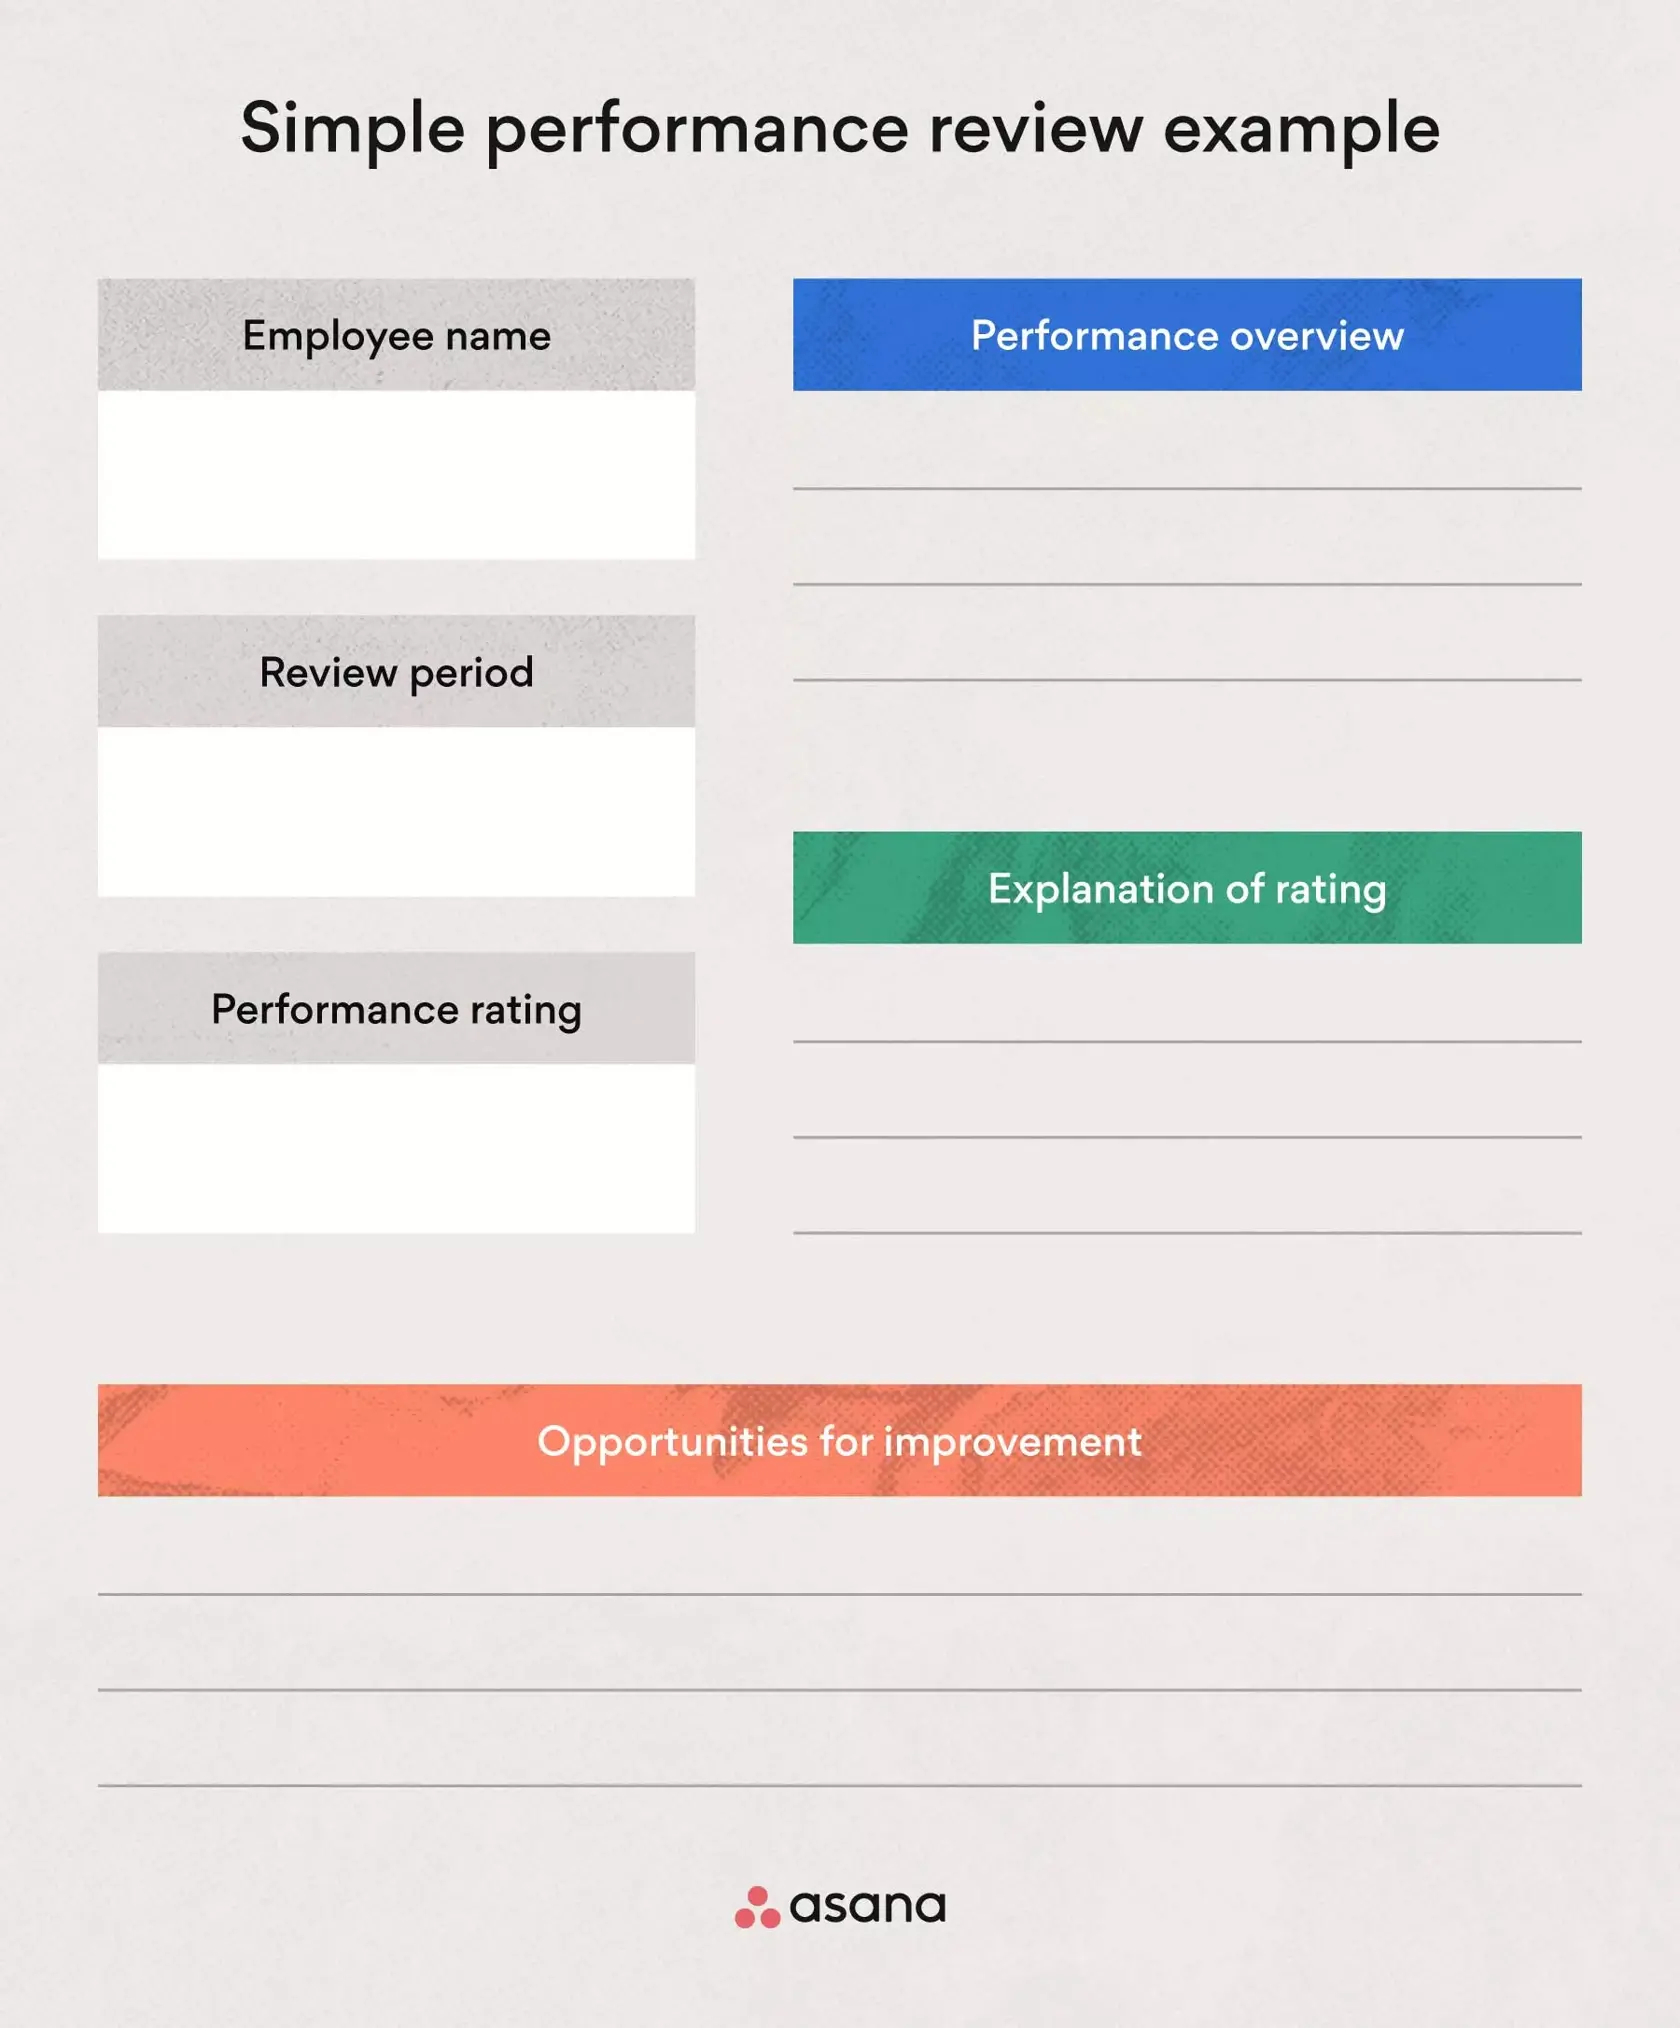 Simple performance review